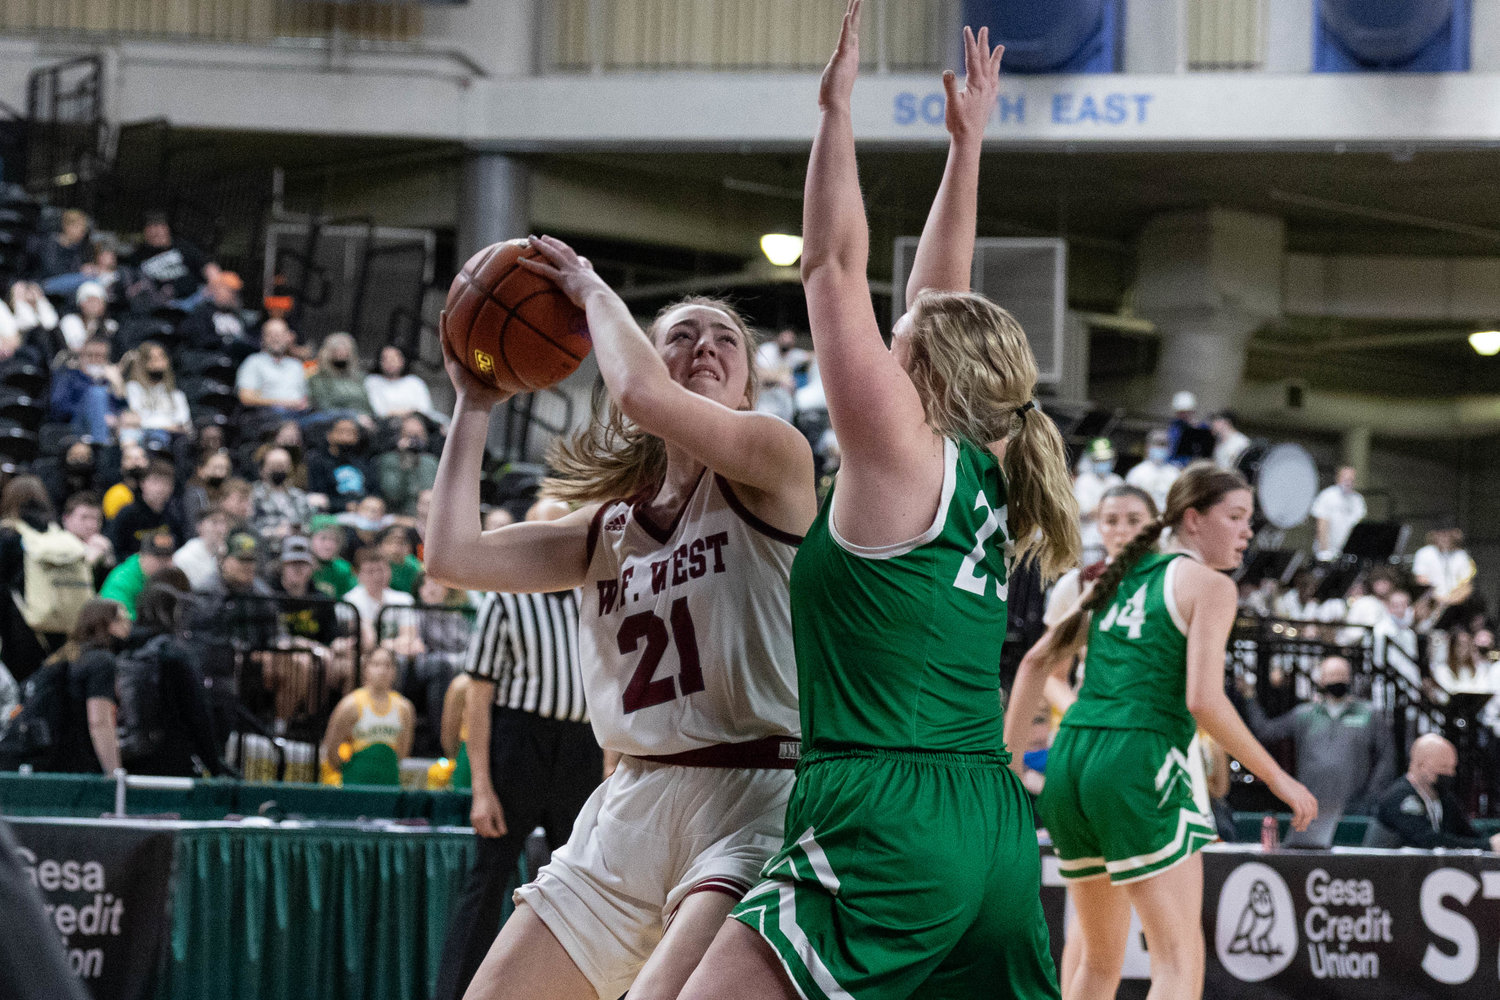 W.F. West forward Morgan Rogerson looks to shoot against Lynden in the 2A State Tournament at the Yakima Valley SunDome March 2.